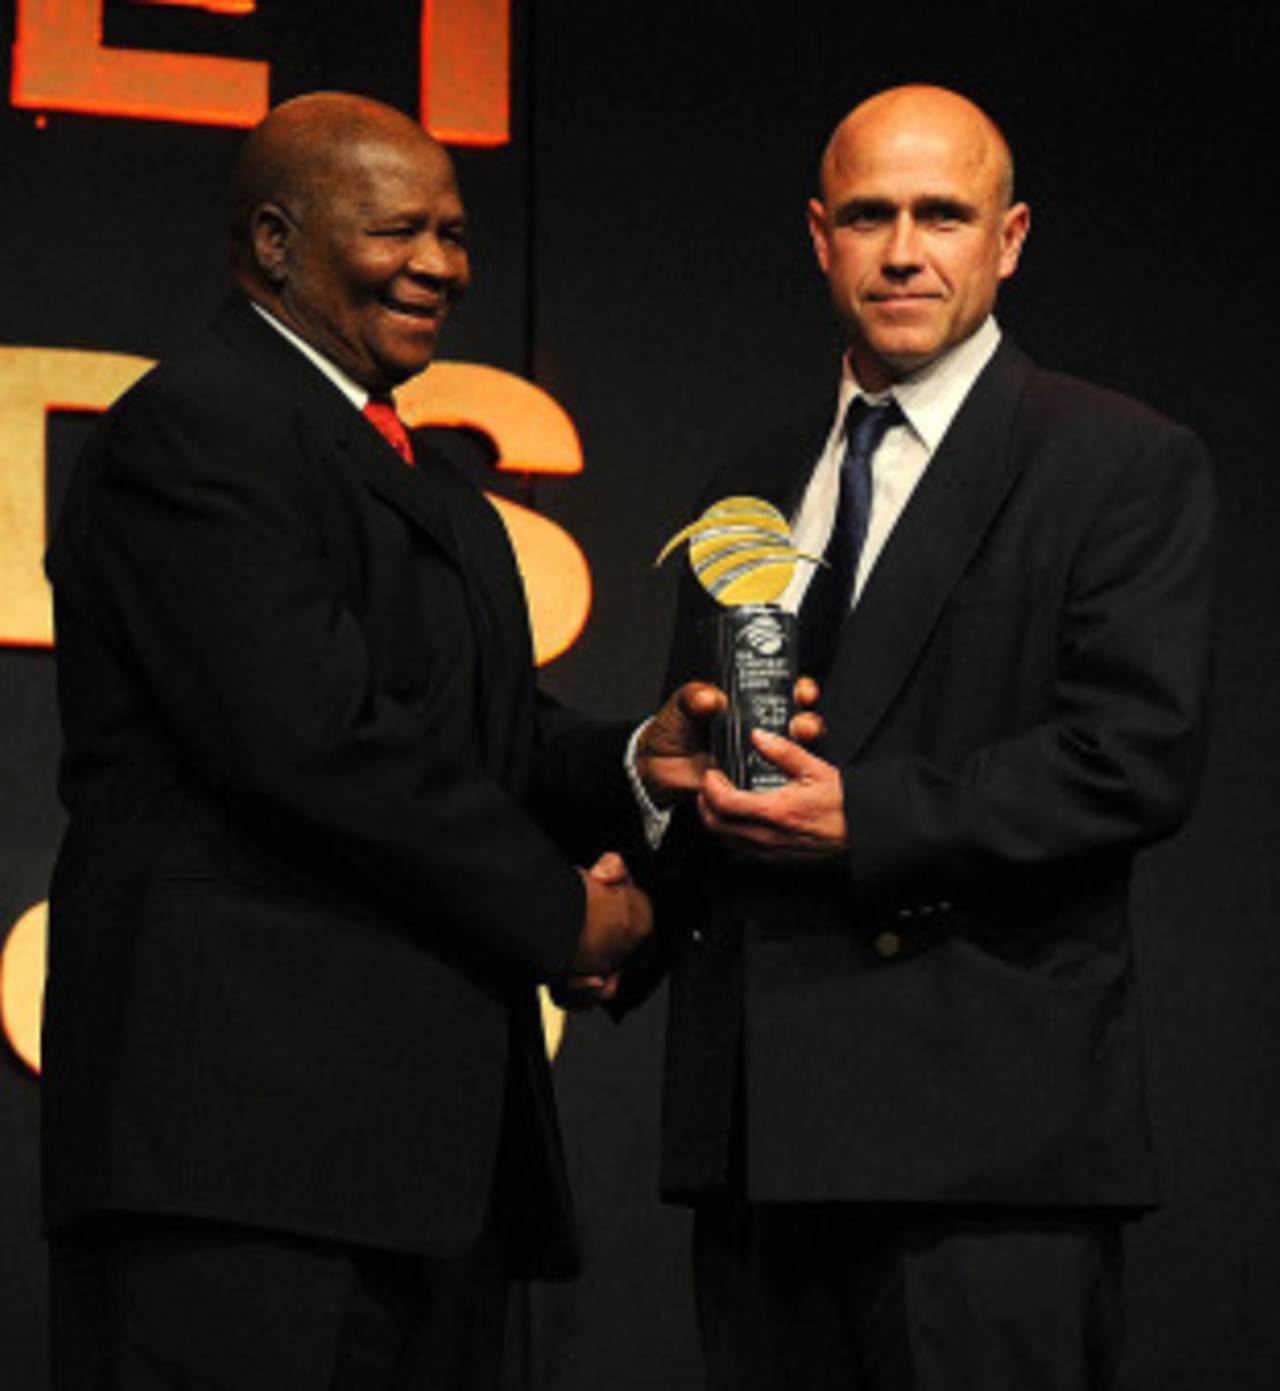 Richard Pybus receives the Coach of the Year 2009 award from Ray Mali, Johannesburg, June 30, 2009